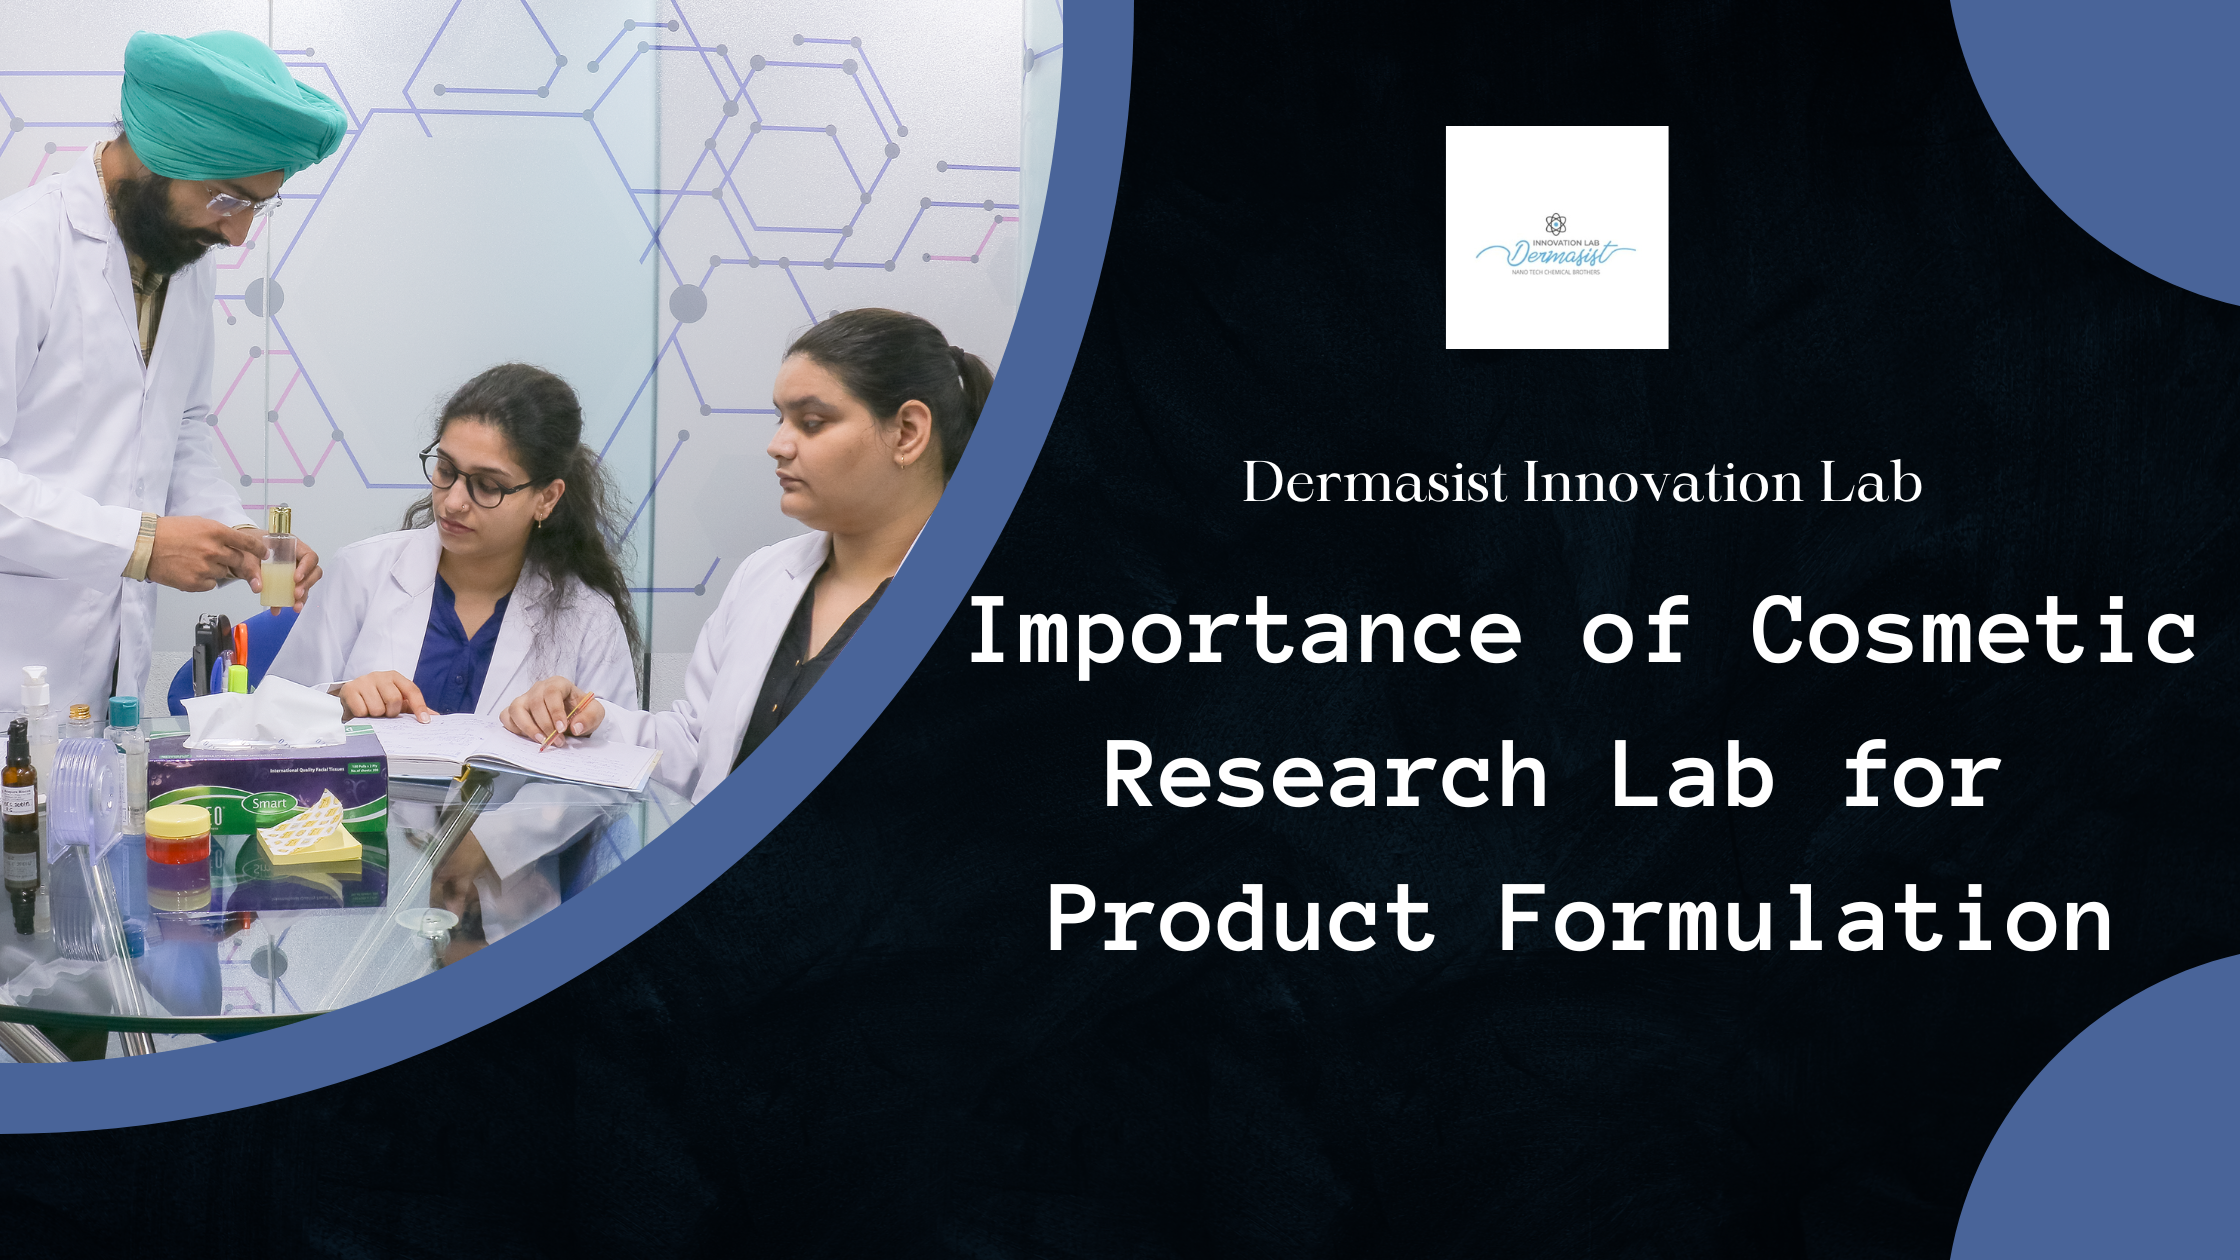 Importance of Cosmetic Research Lab for Product Formulation